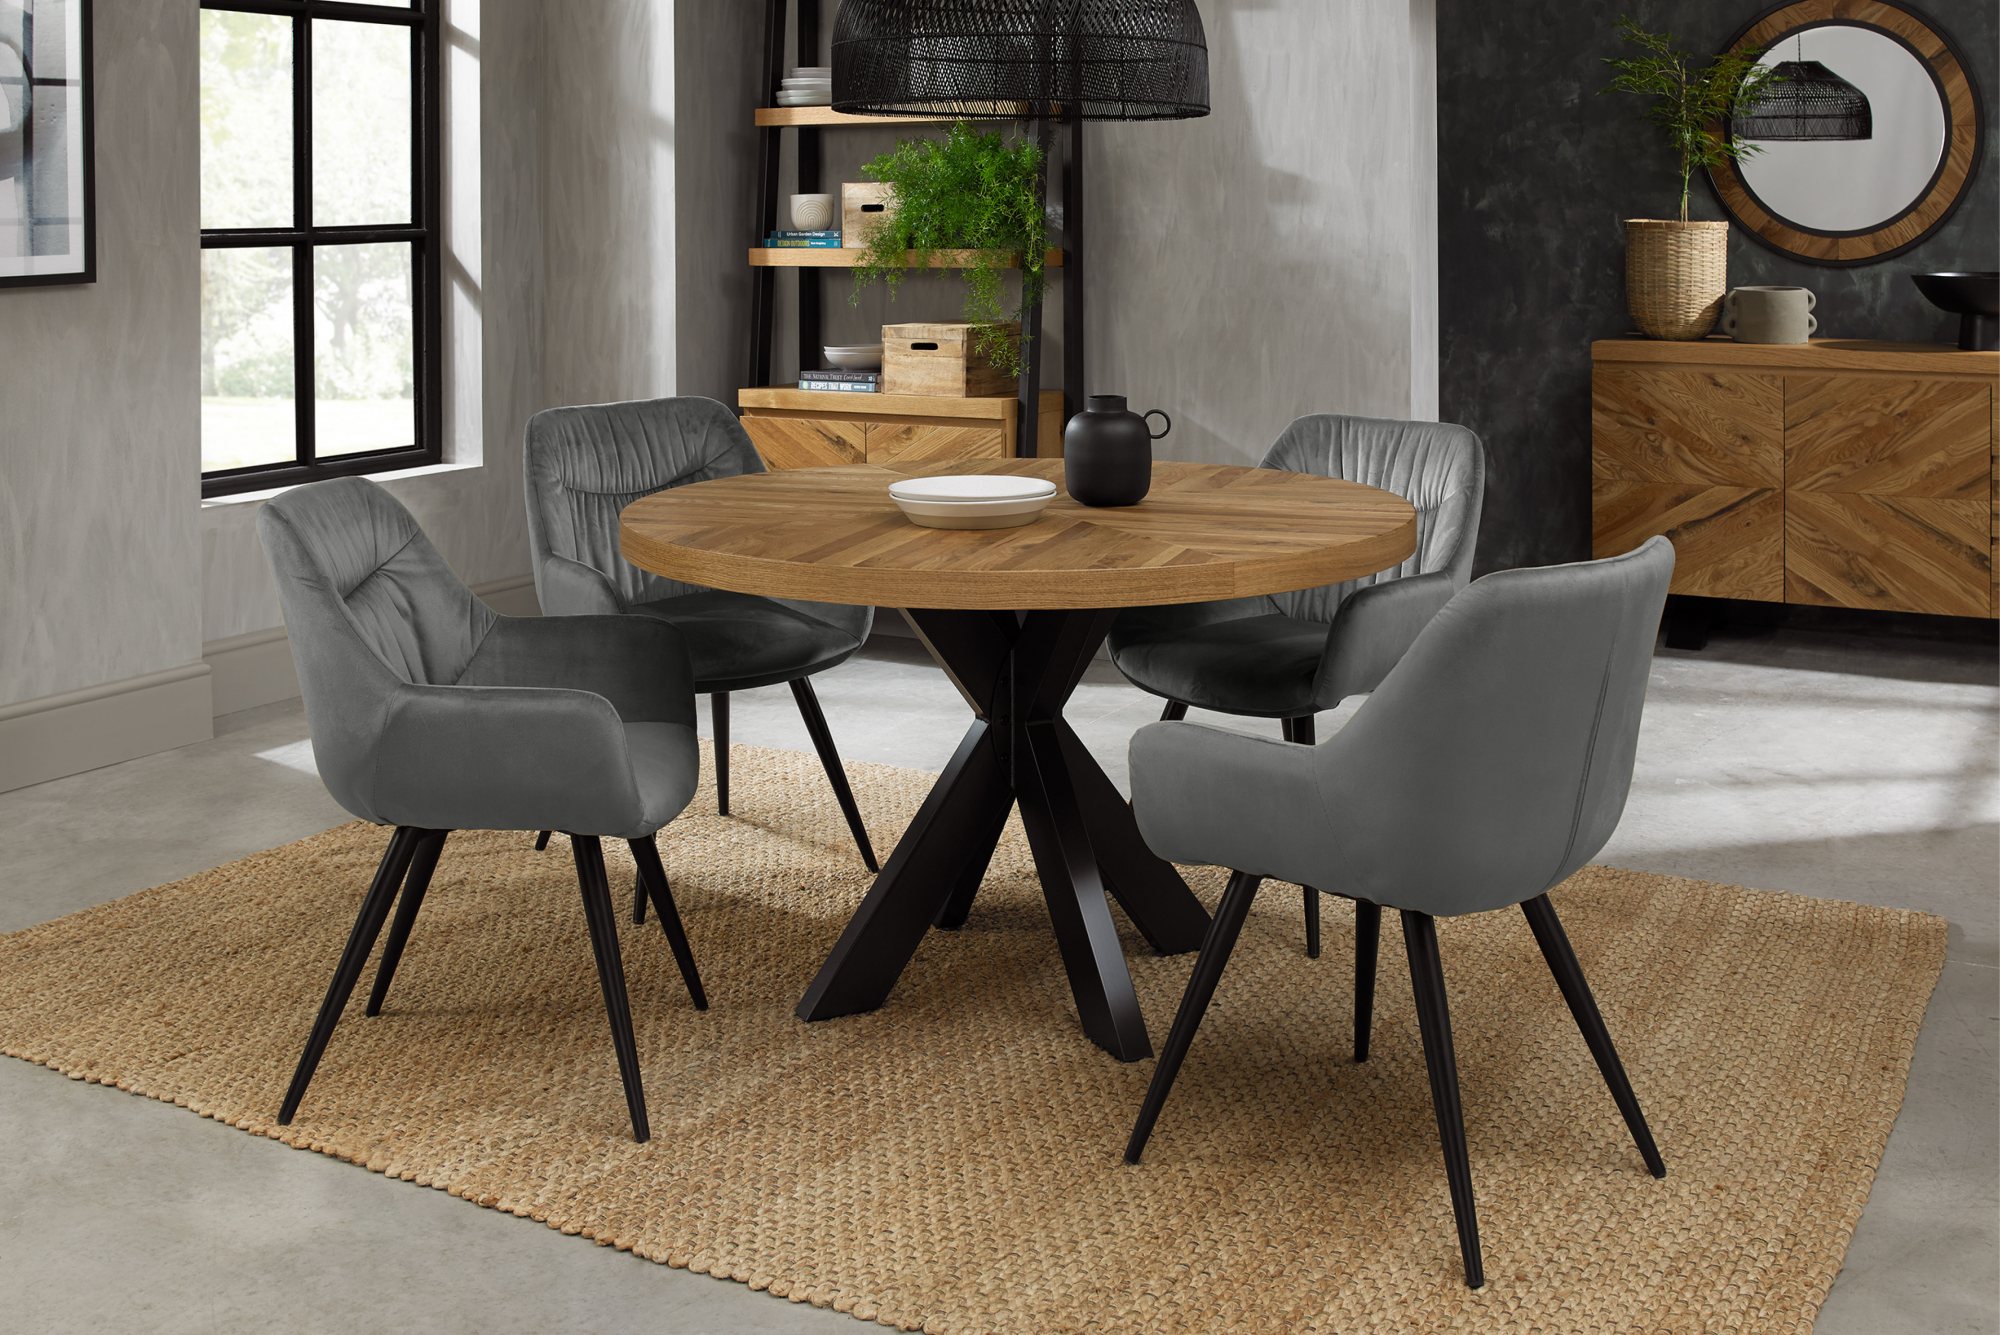 Home Origins Bosco Rustic Oak 4 seater dining table with 4 Dali chairs- grey velvet fabric